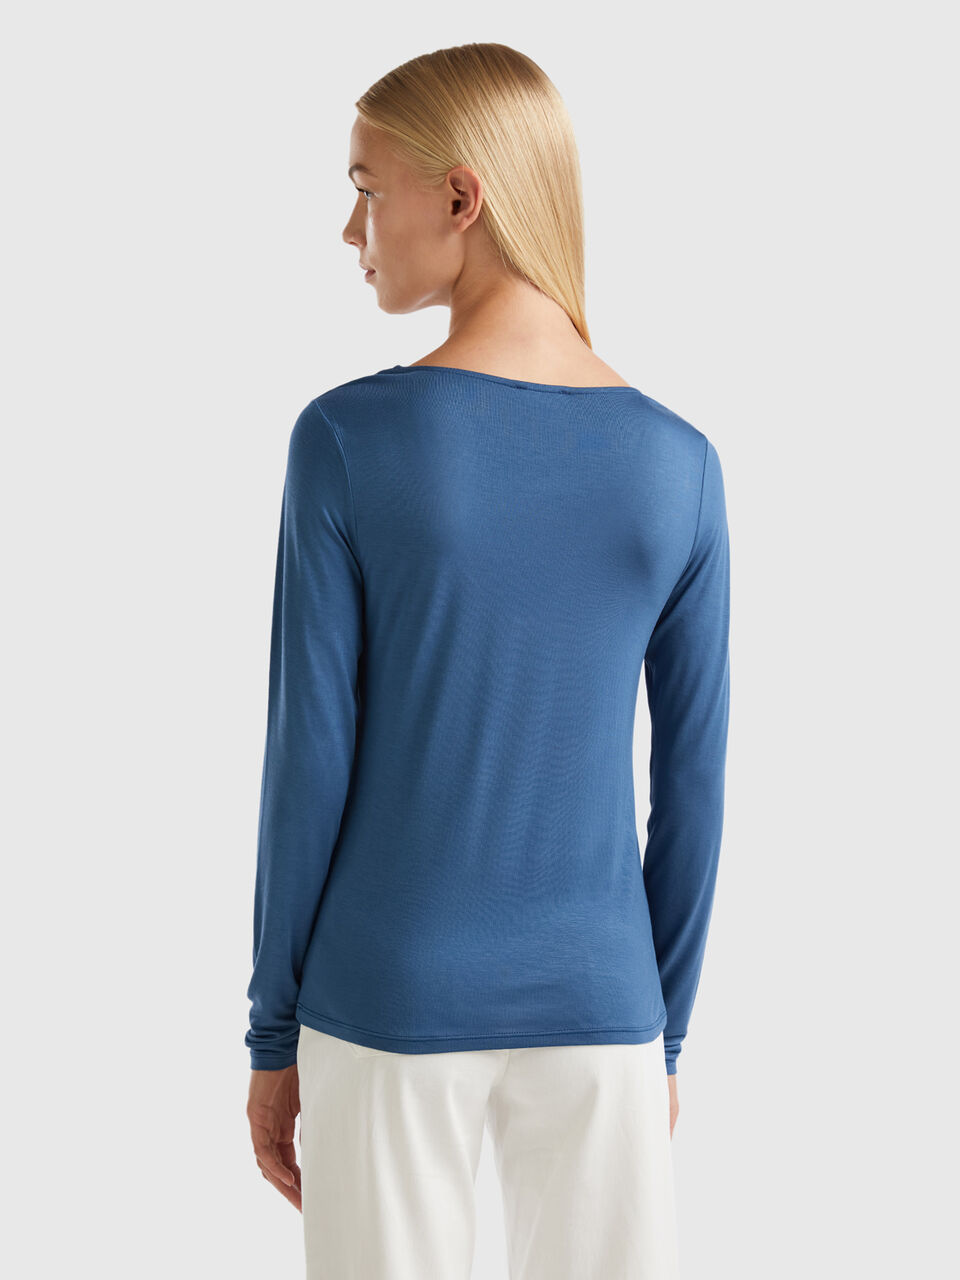 T-shirt in sustainable stretch | Benetton Force viscose Blue - Air